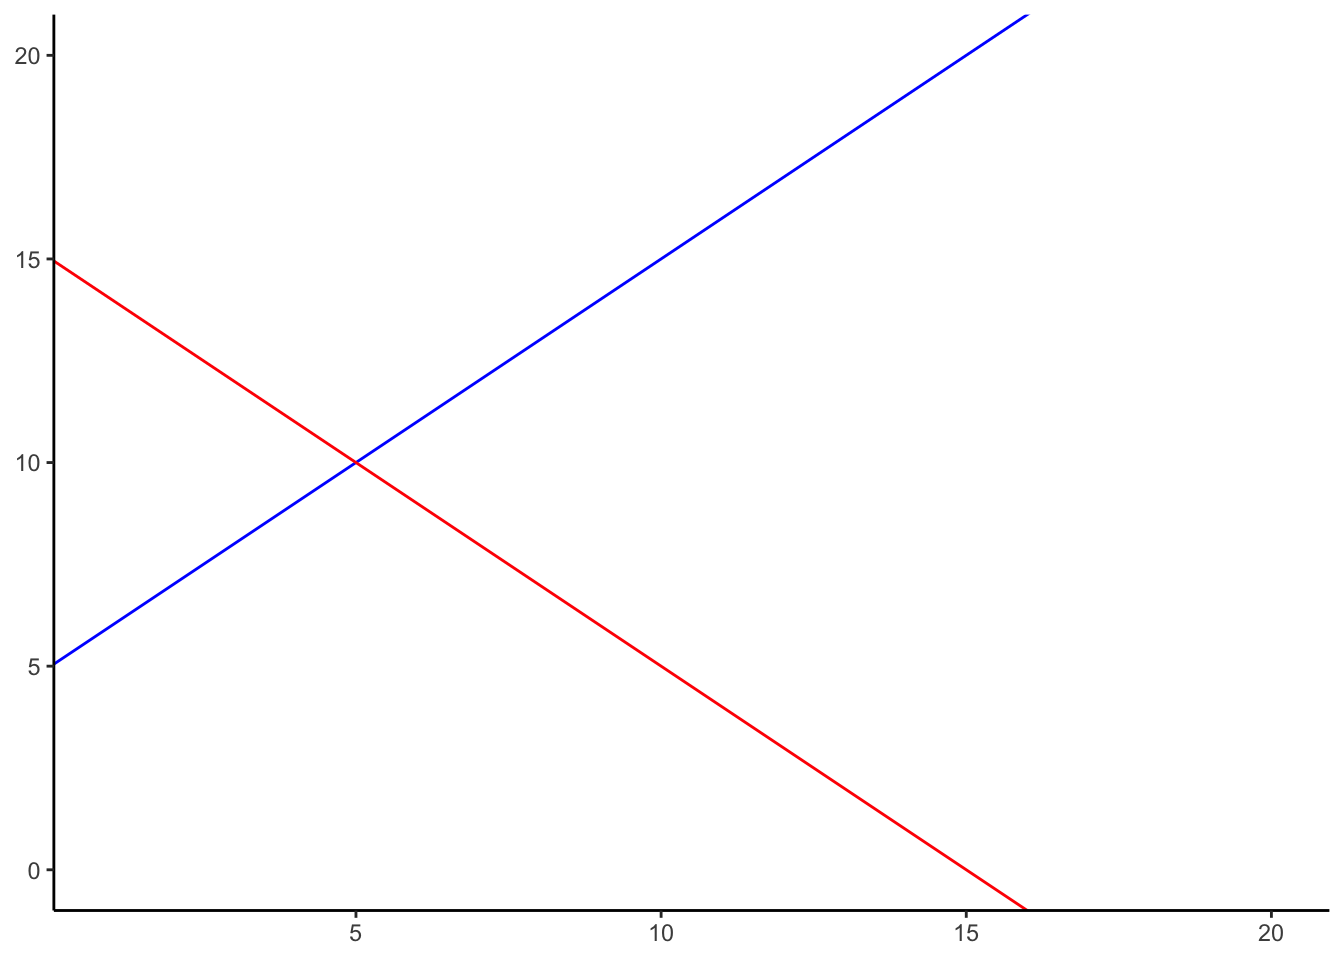 Two different lines with different y-intercepts (where the line crosses the y-axis), and different slopes. A positive slope makes the line go up from left to right. A negative slope makes the line go down from left to right.